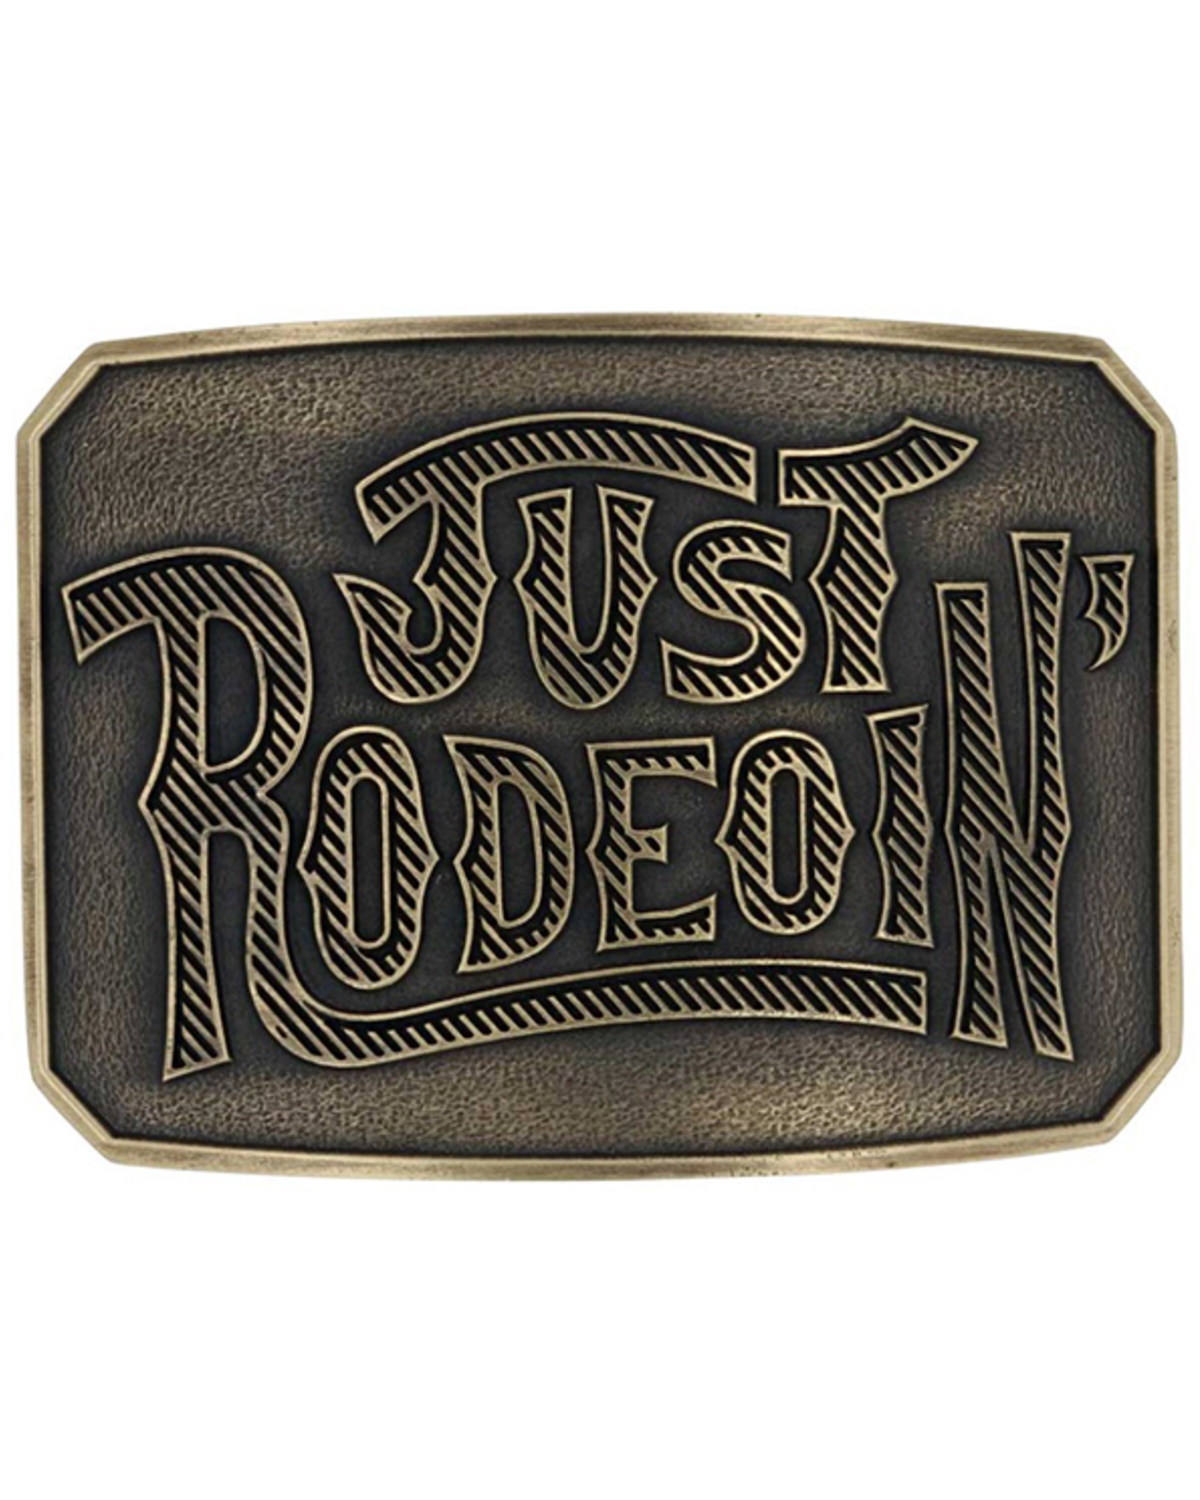 Montana Silversmiths Dale Brisby Just Rodeoin' Attitude Belt Buckle